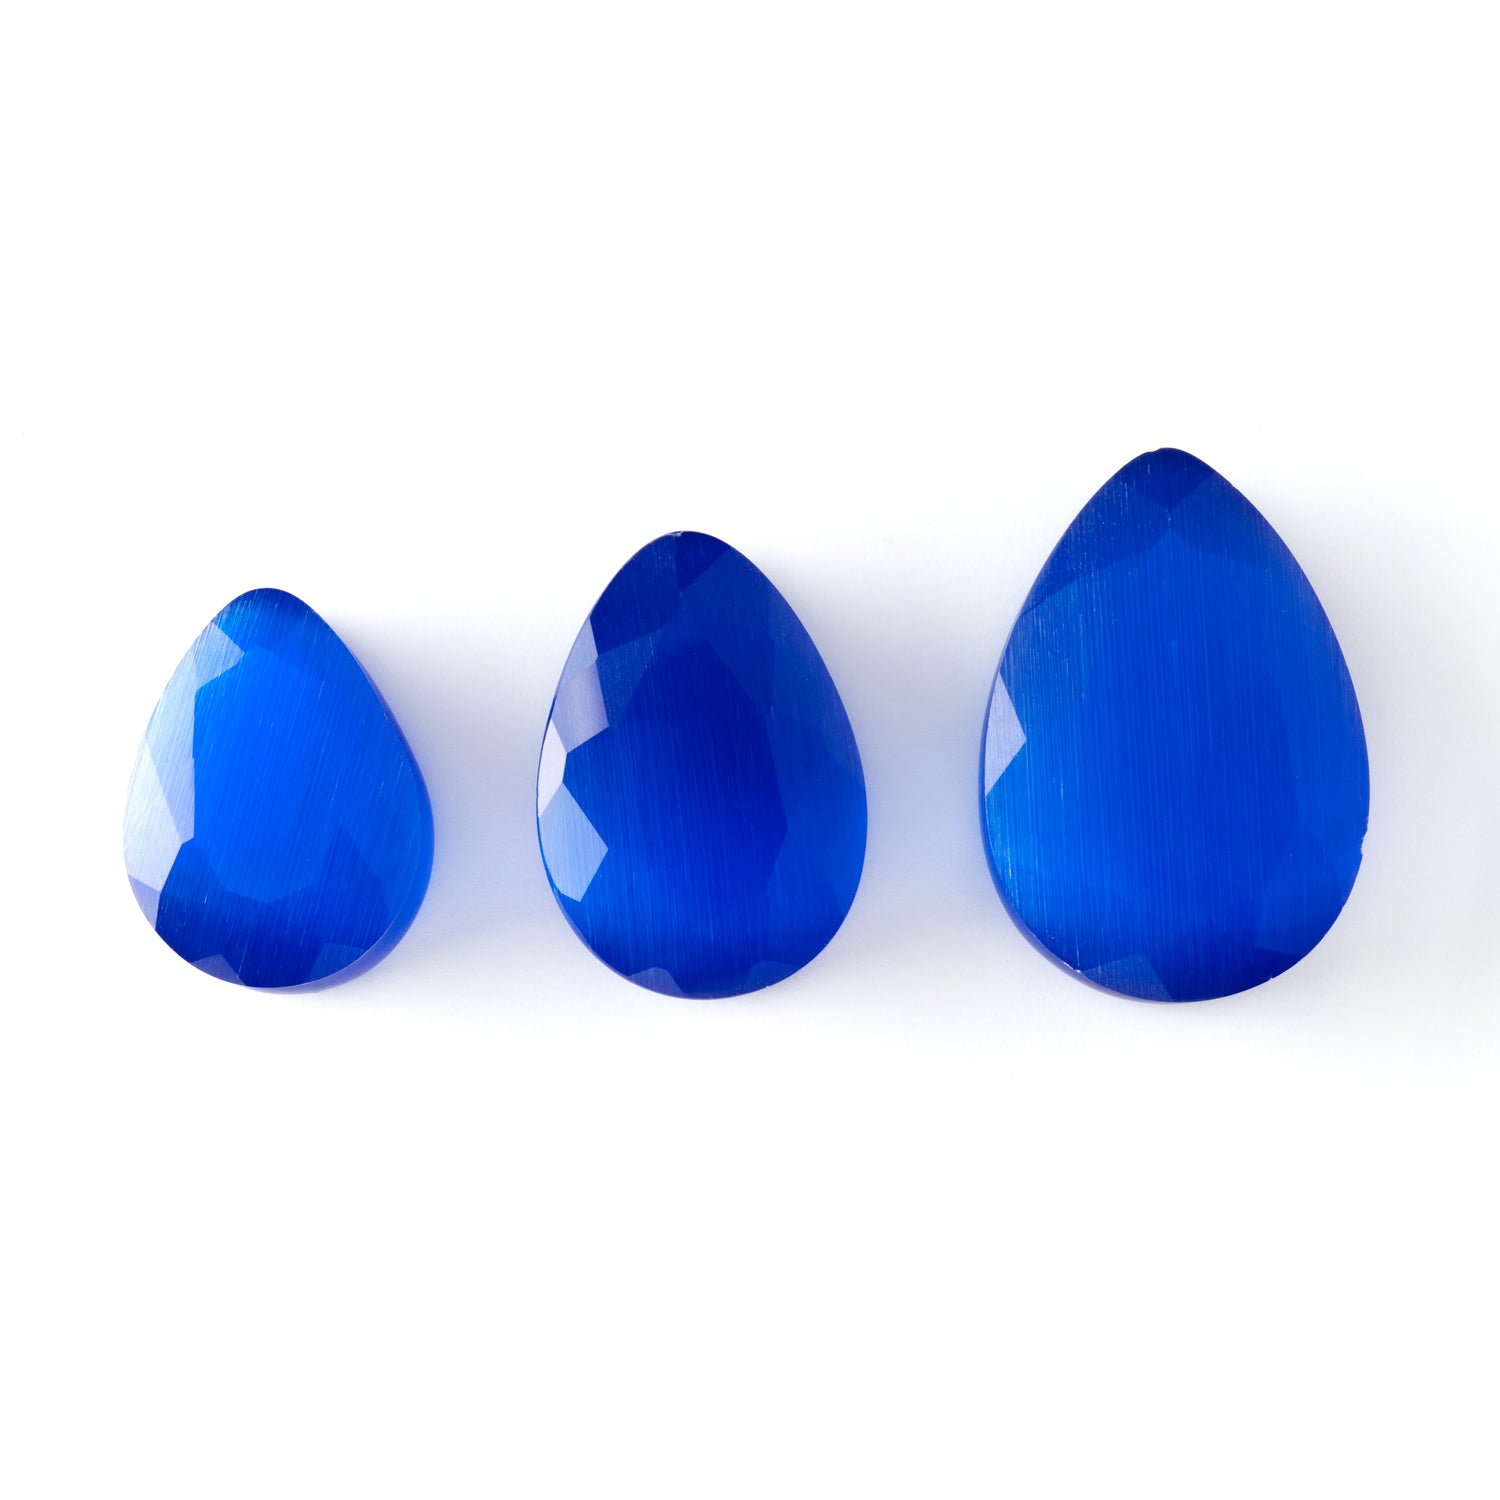 different sizes of blue cat eye teardrop faceted ear plug frontal view